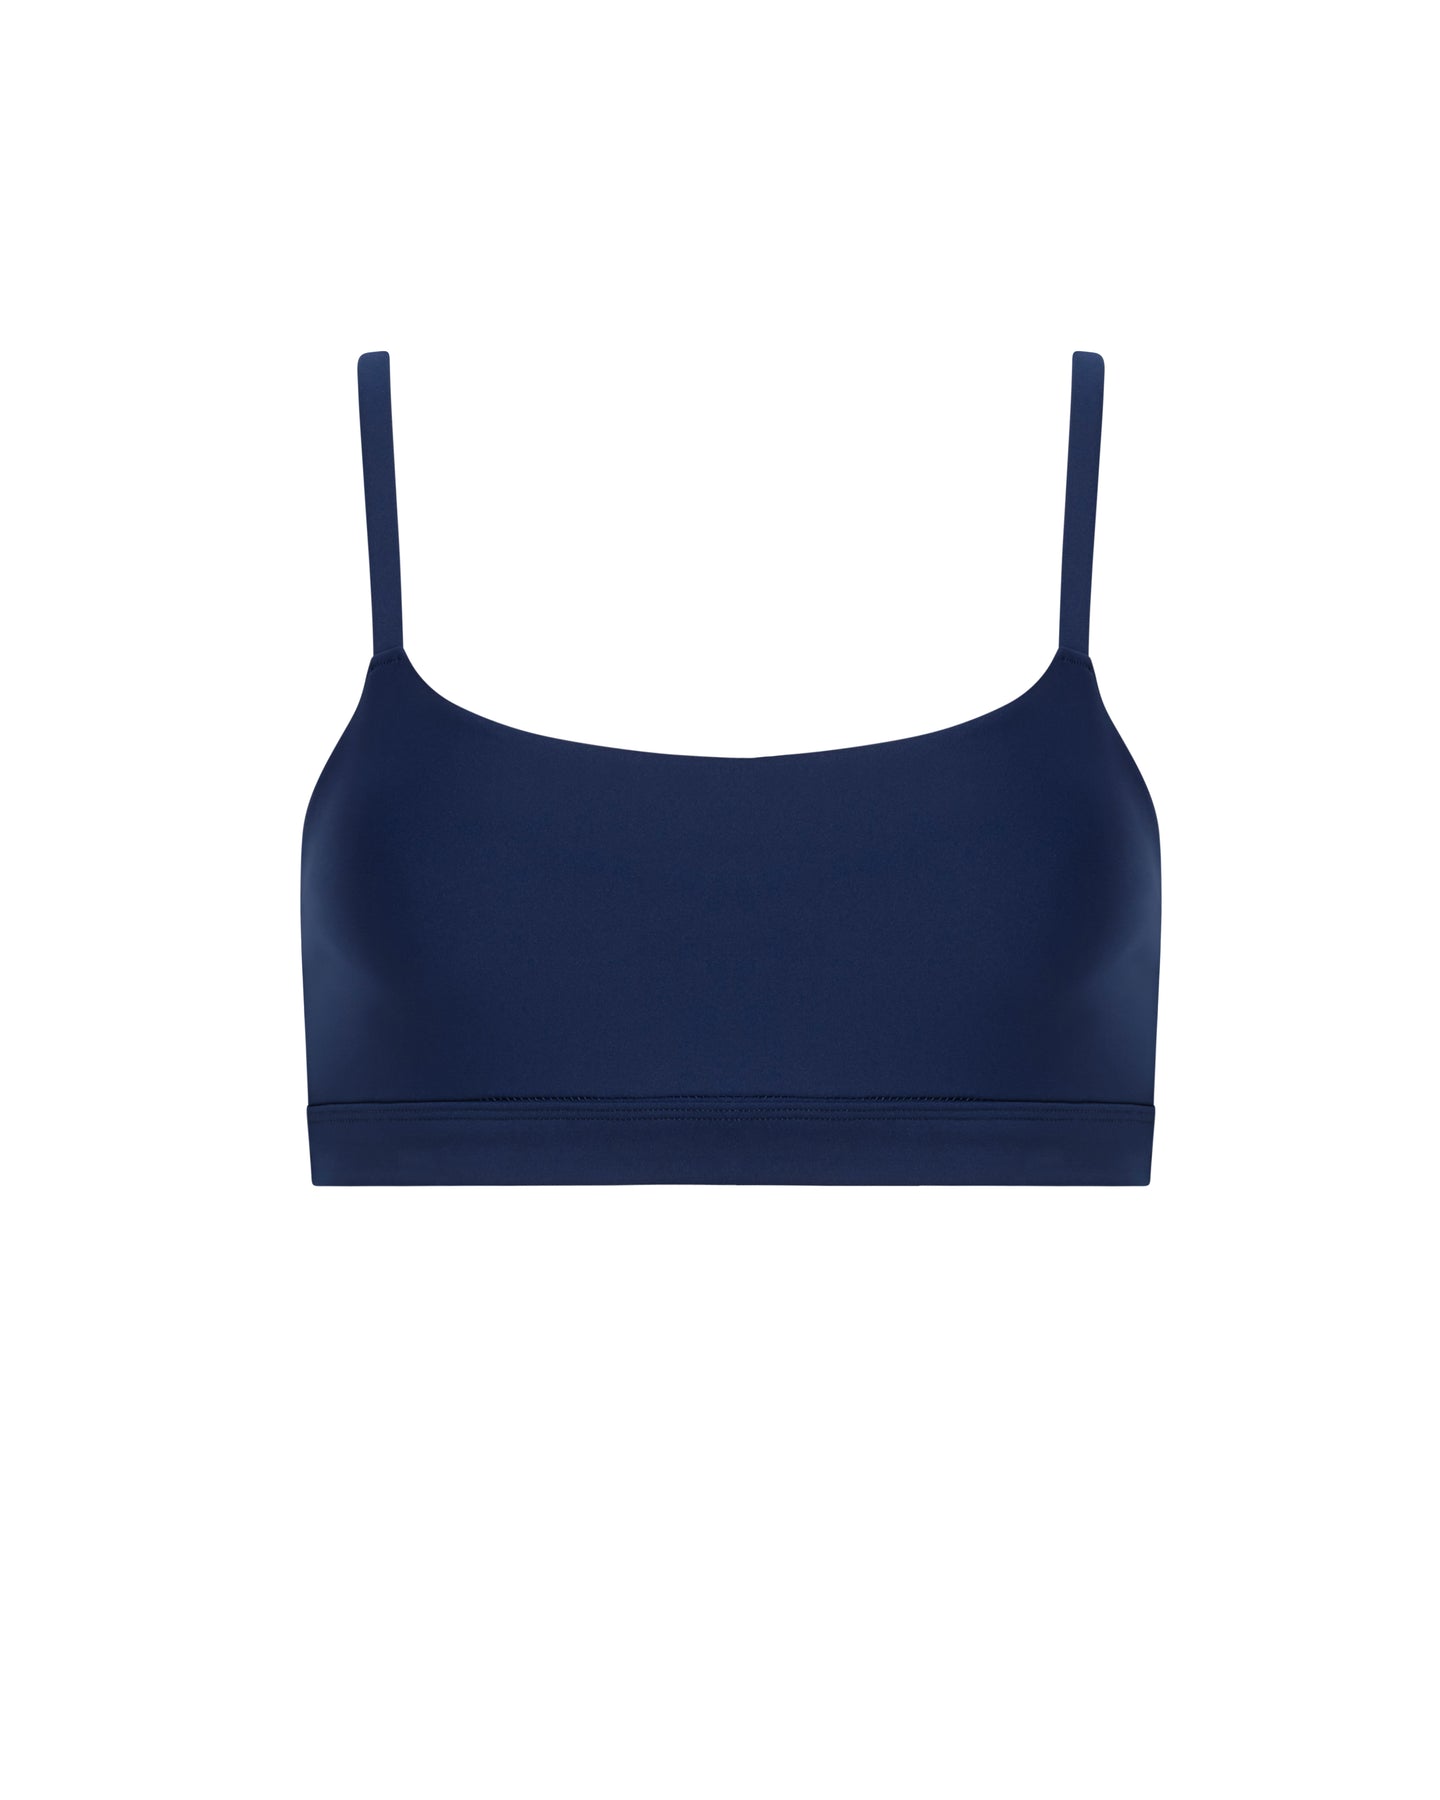 Women's Etched in Style Bralette with Extenders Thin Adjustable Strap  Triangle Lace Spaghetti Bralette Navy